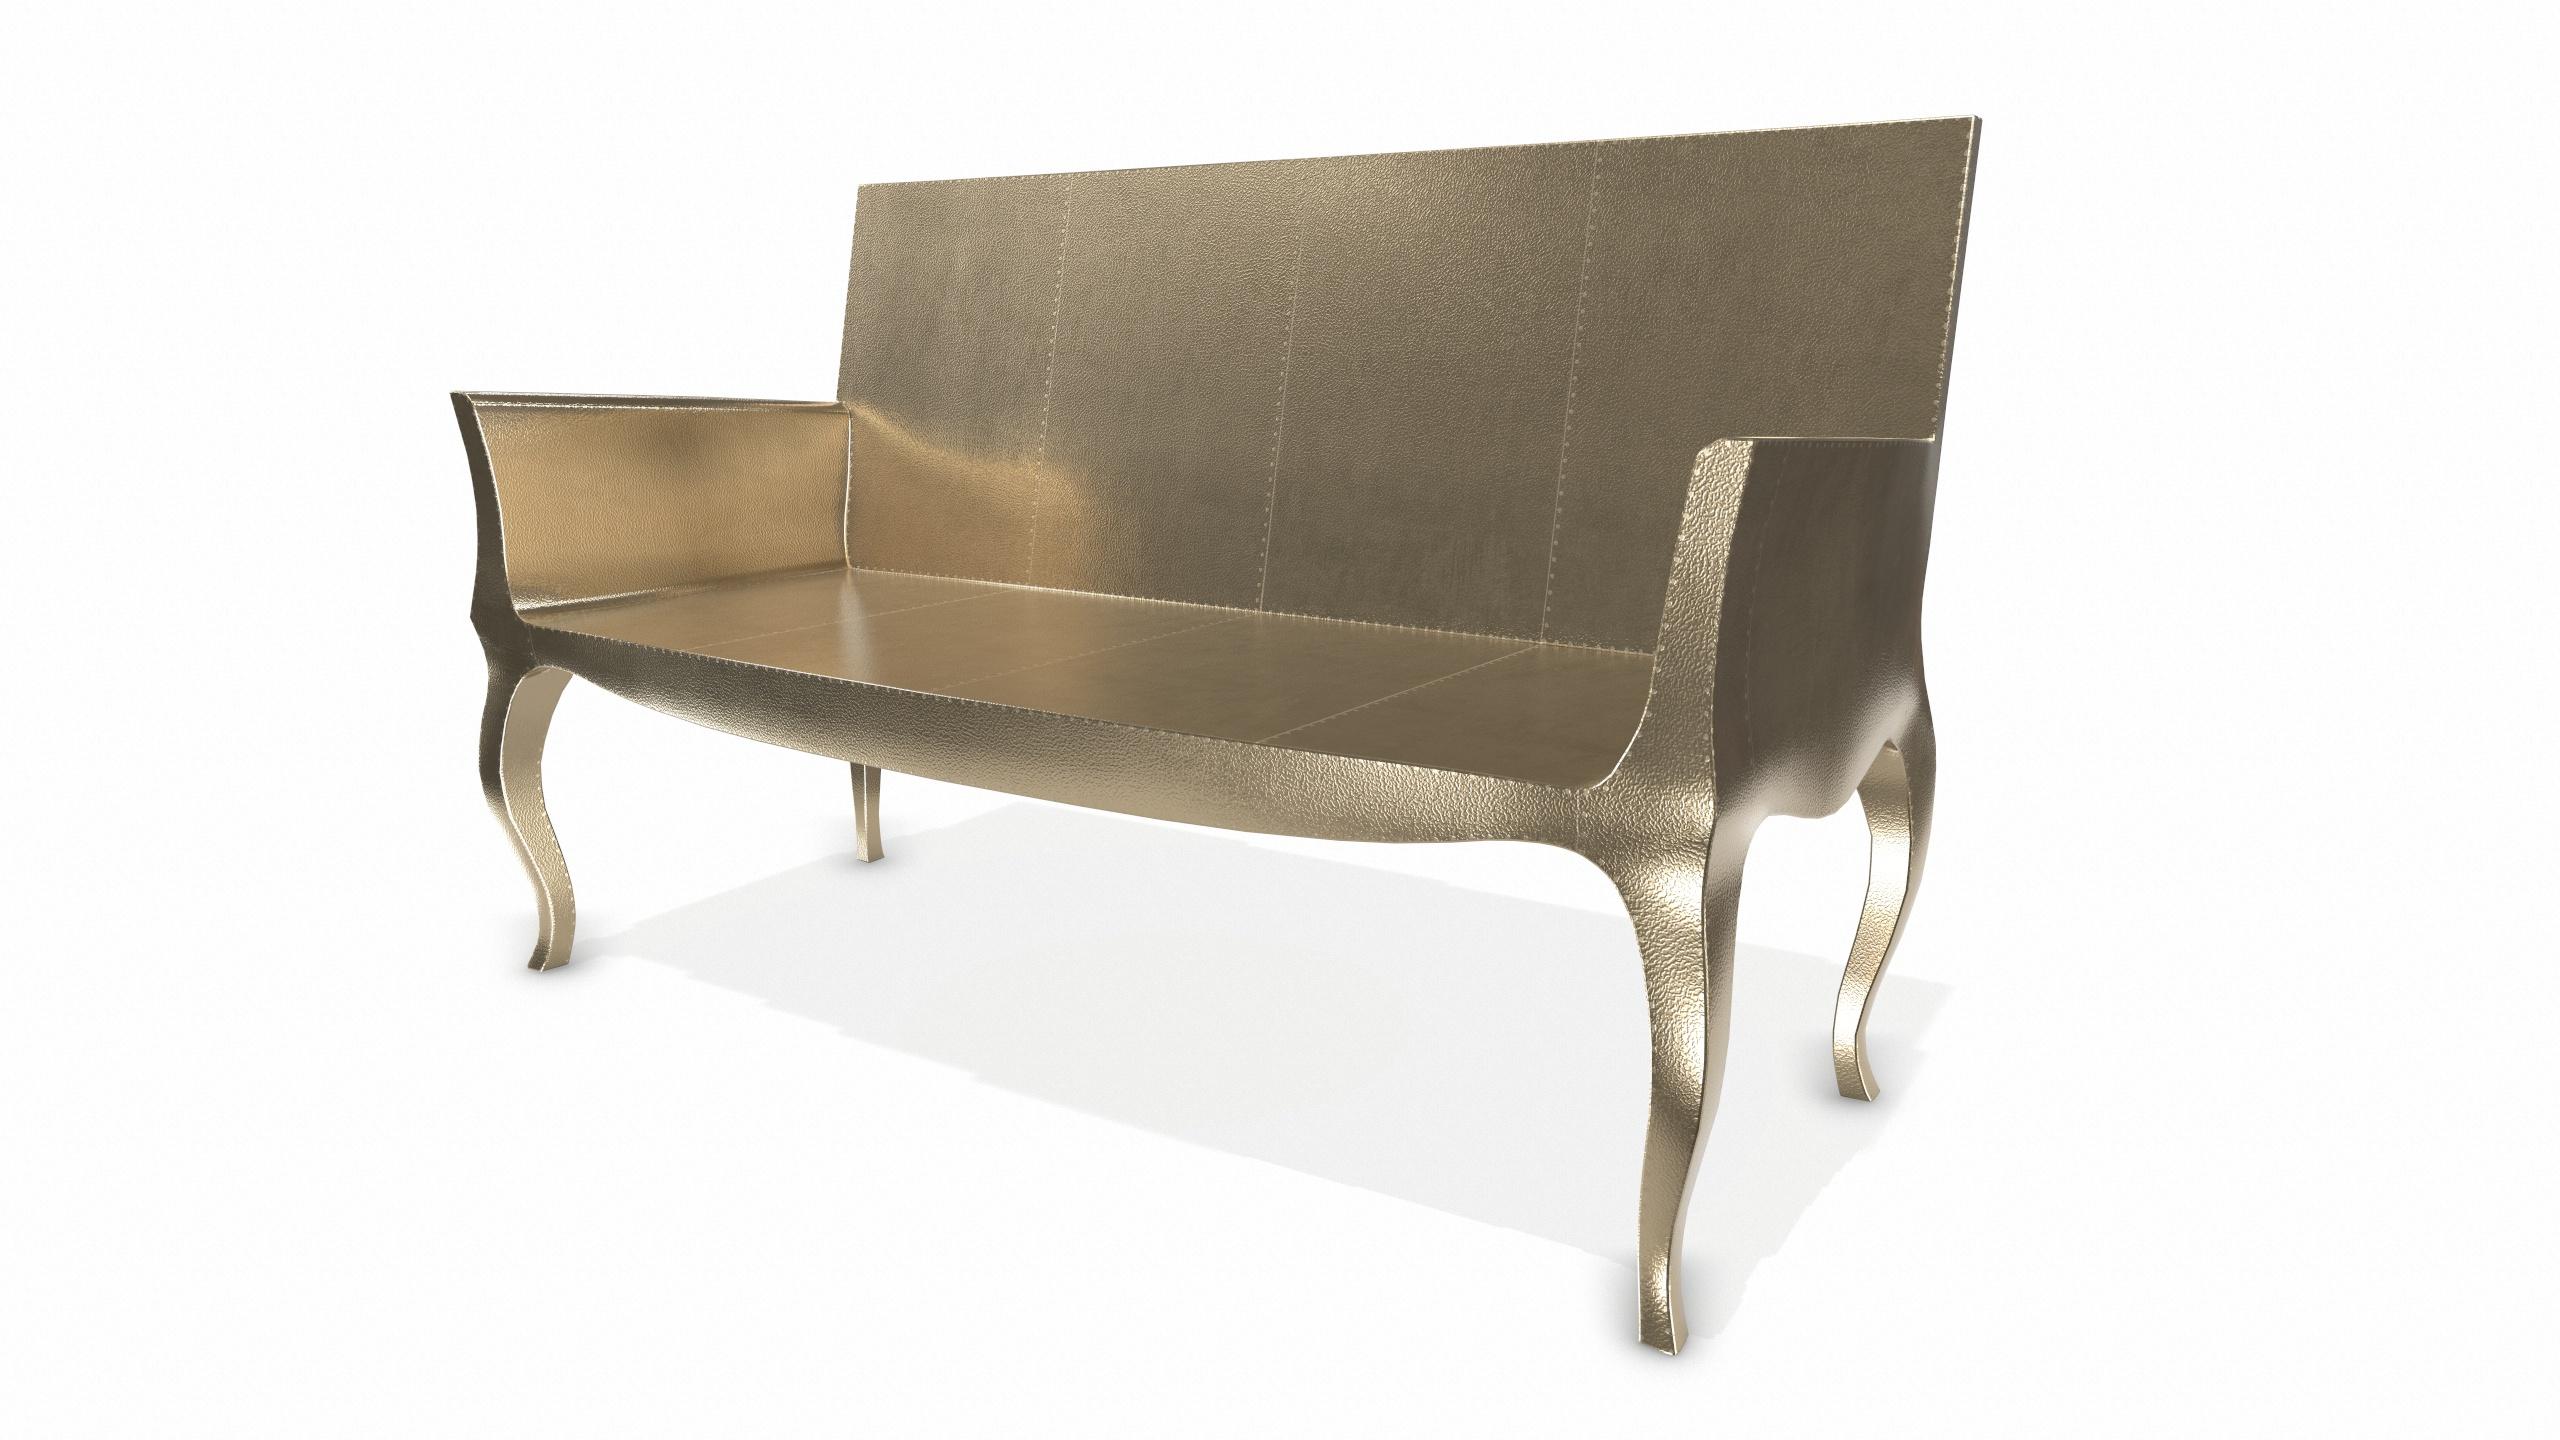 Wood Louise Settee Art Deco Benches in Fine Hammered Brass by Paul Mathieu For Sale